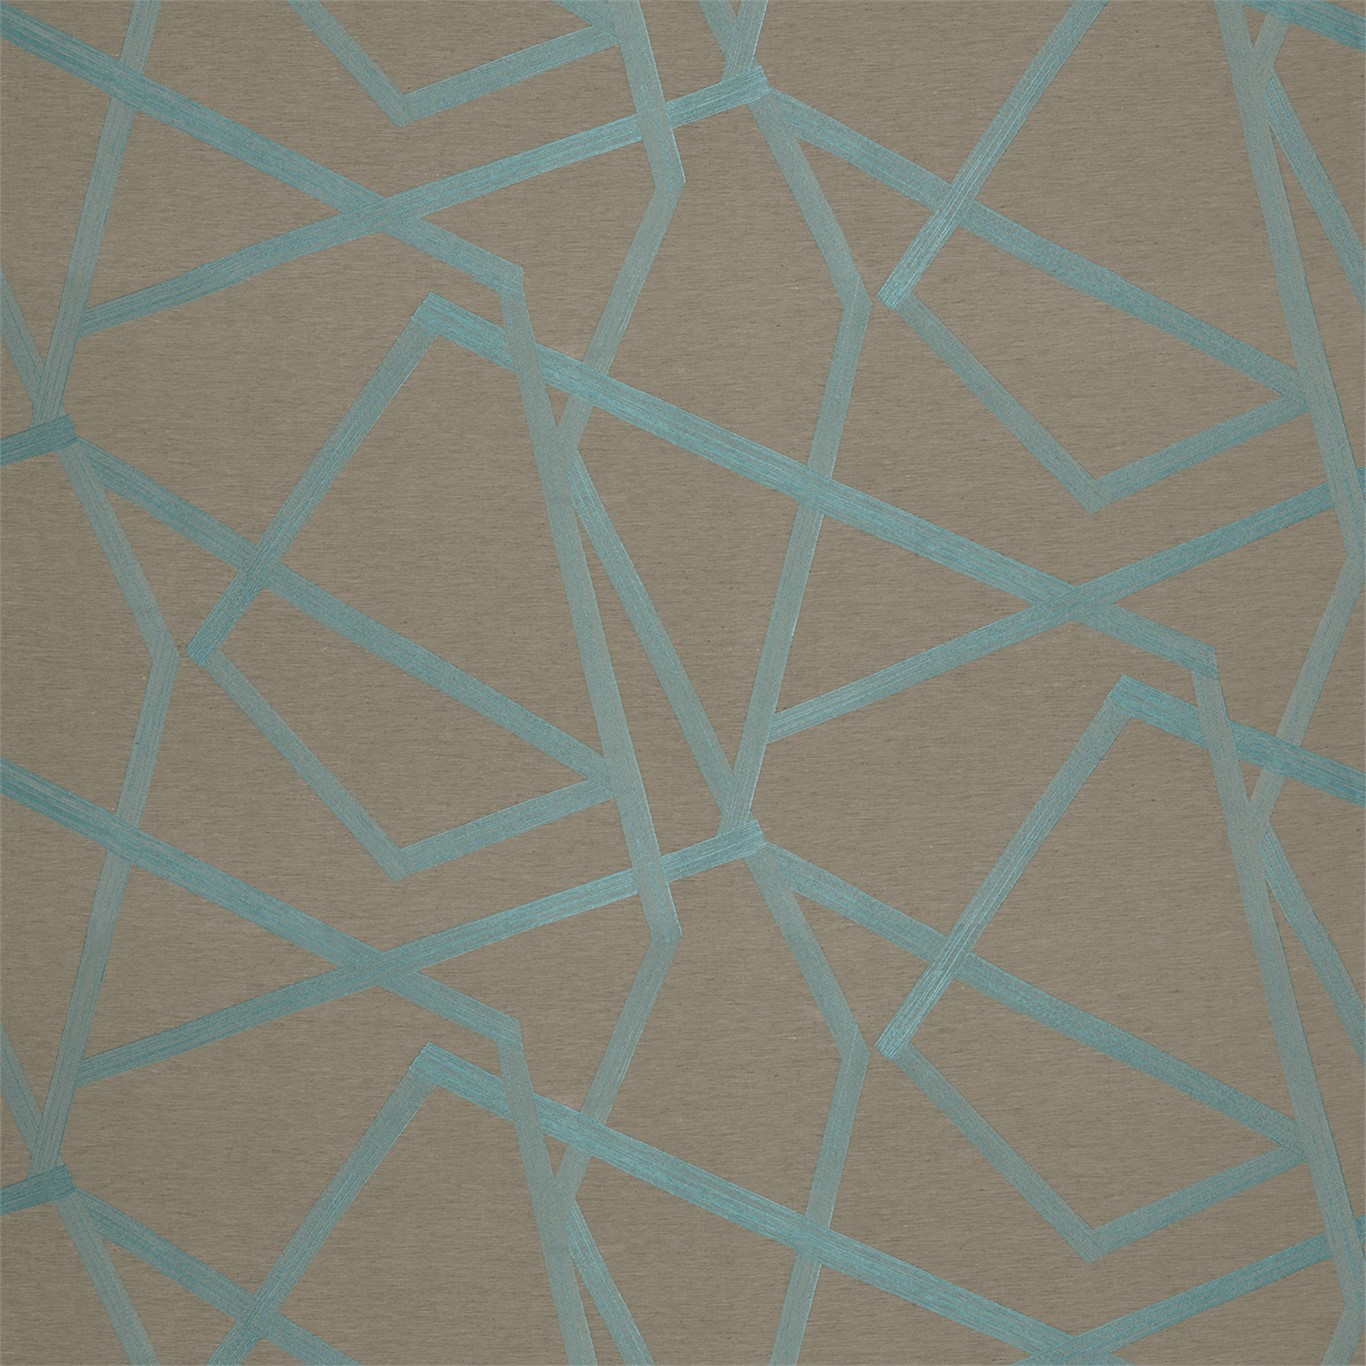 Sumi Sepia/Teal Fabric by HAR